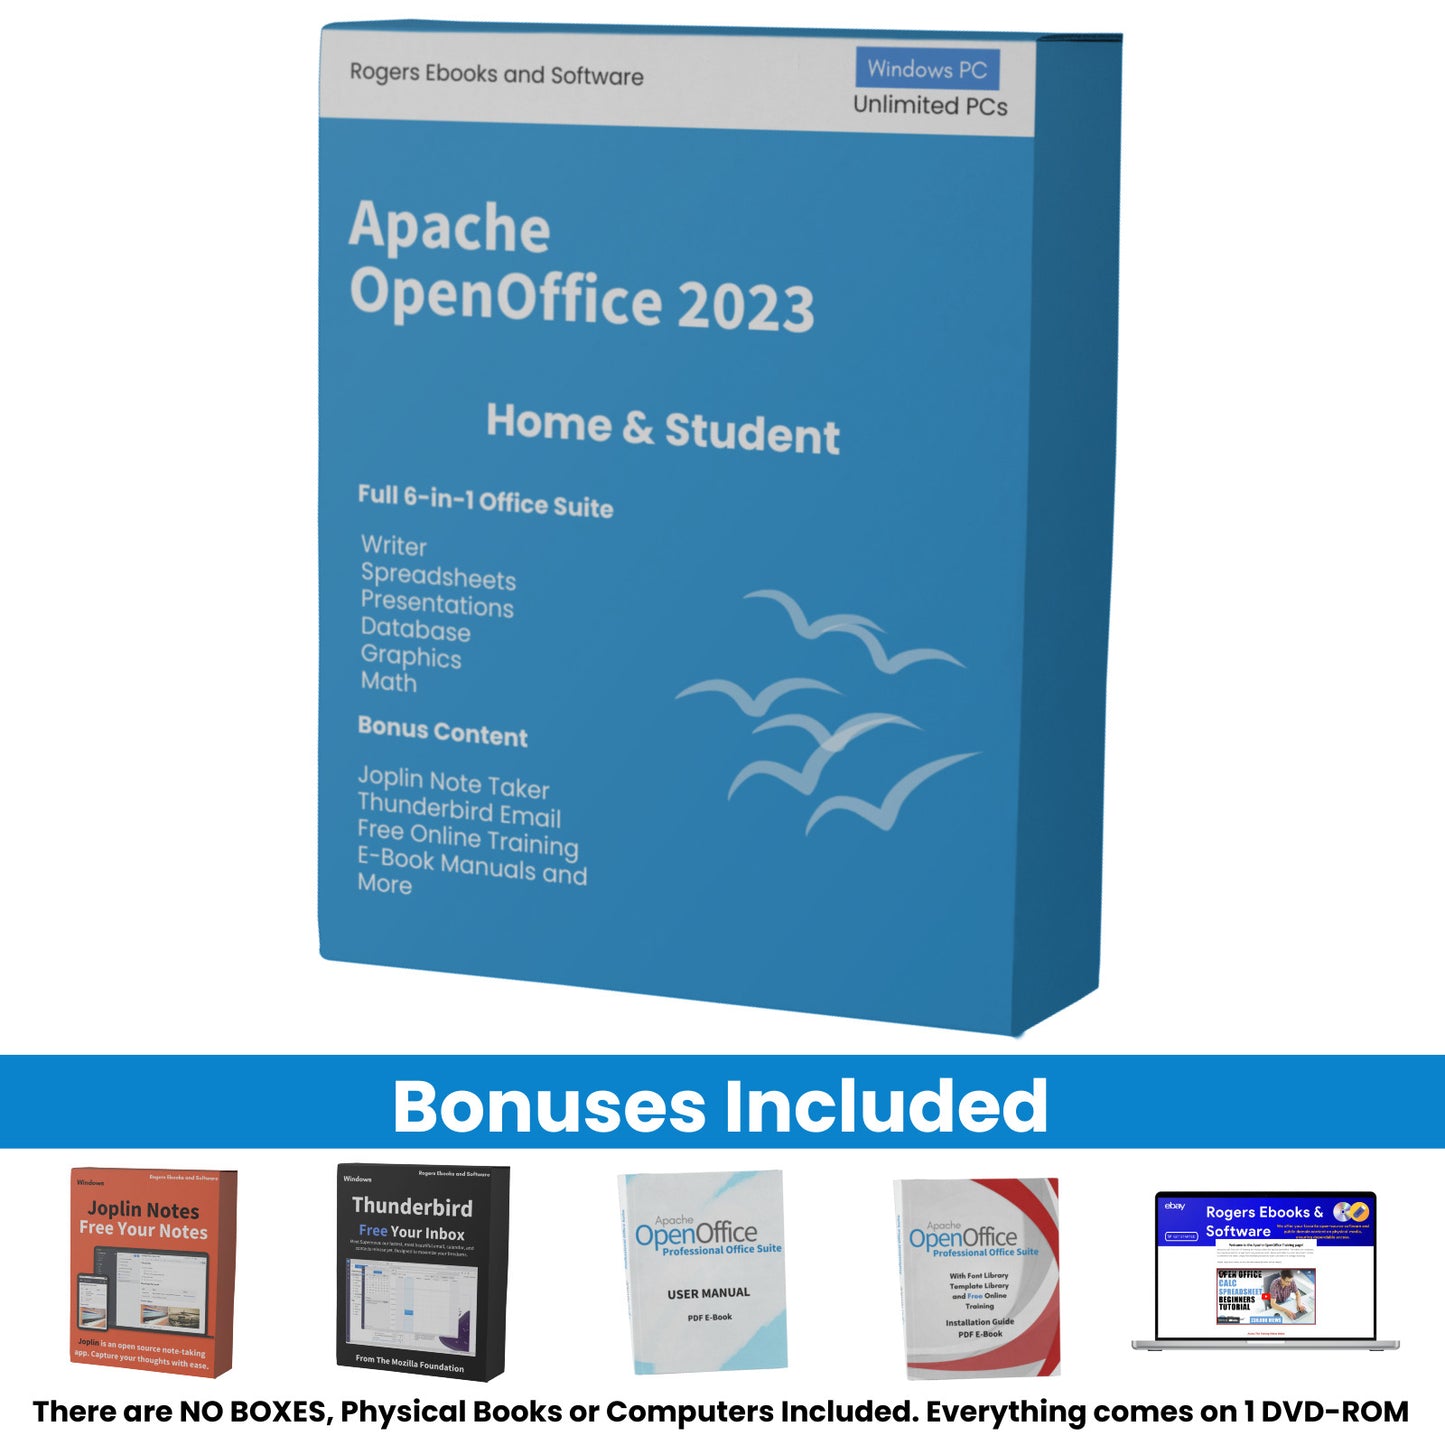 Apache Open Office 2023 Home and Student Bundle Overview